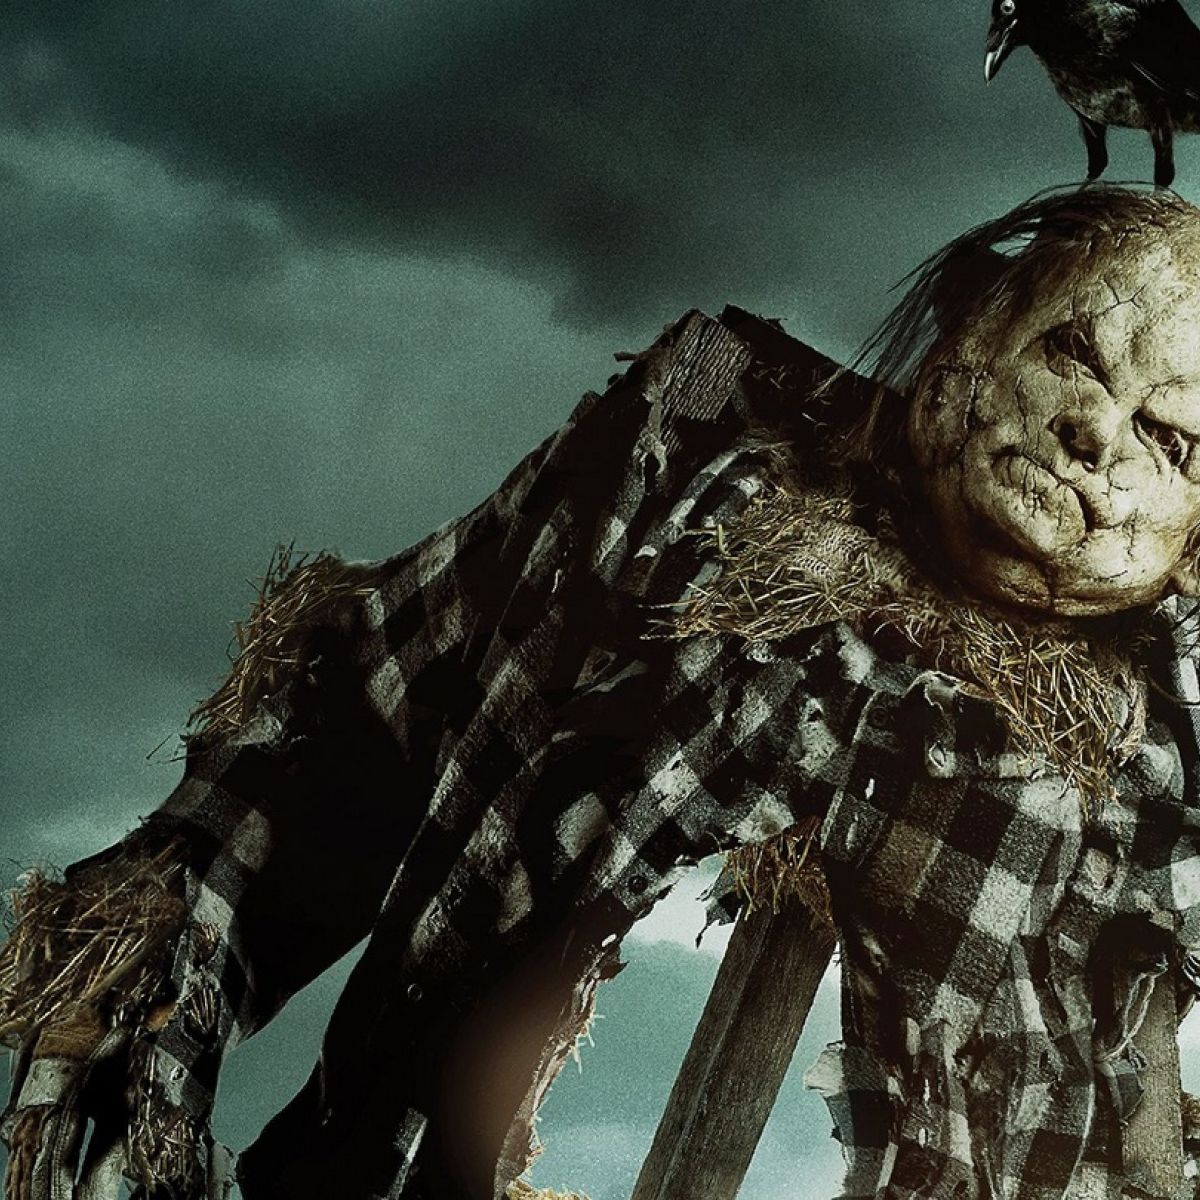 Scary Stories To Tell In The Dark Stephen King Would Approve